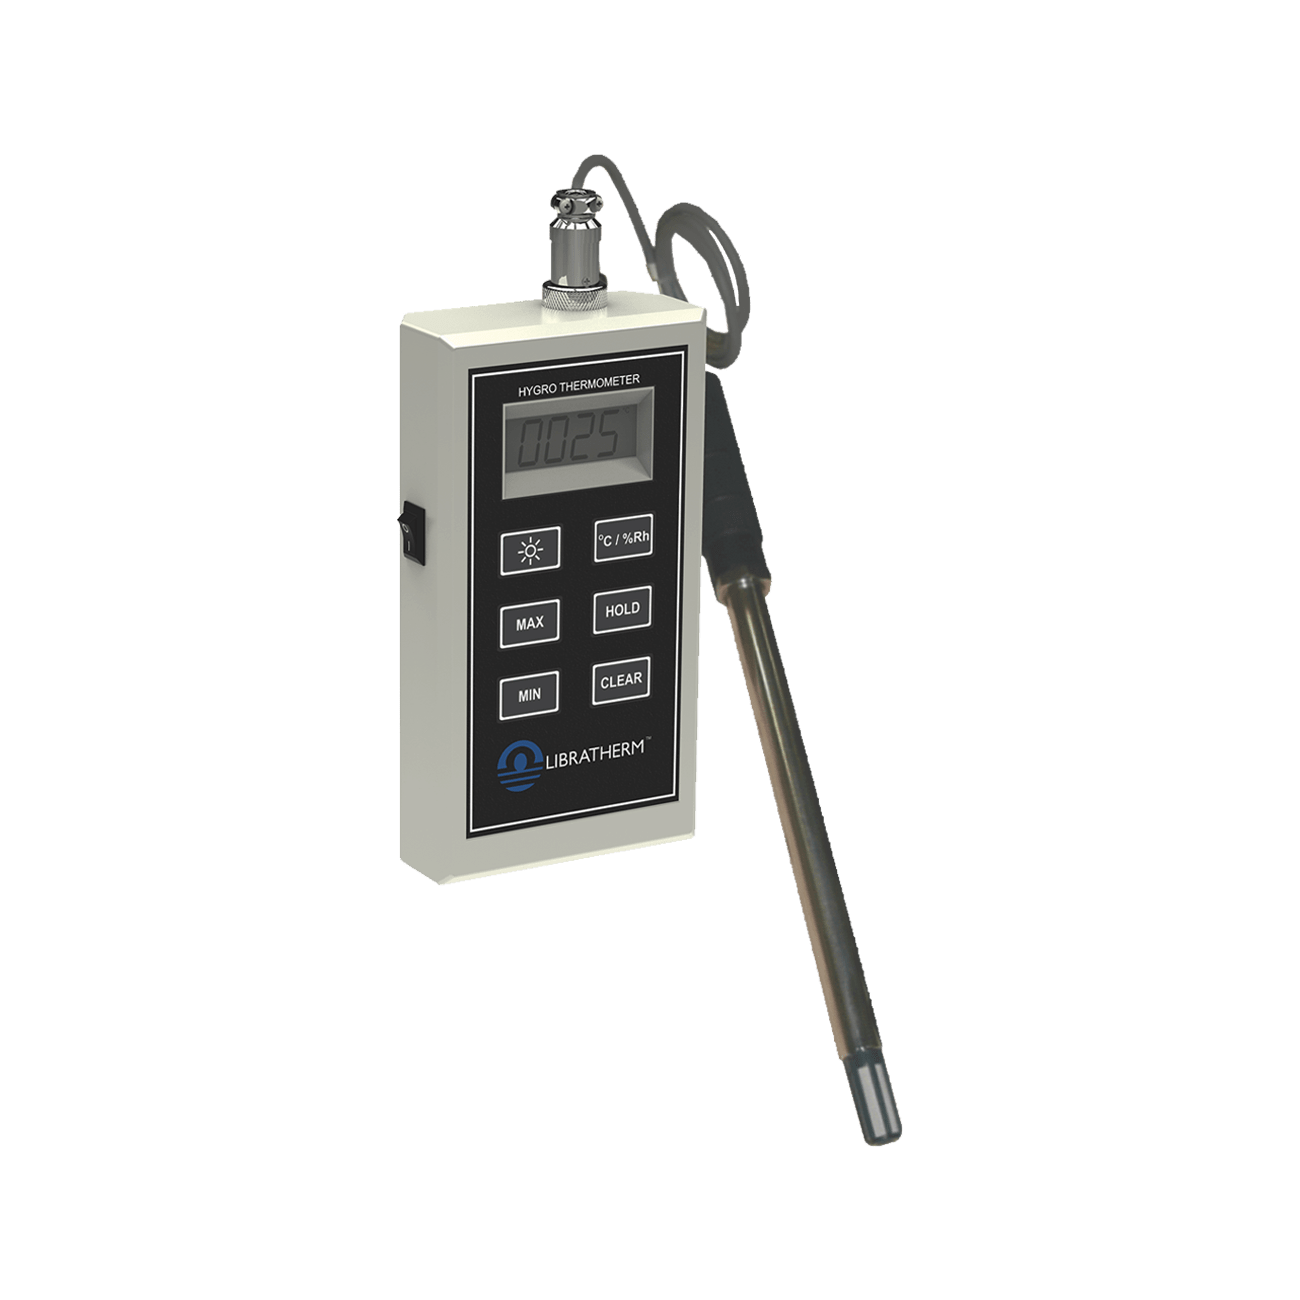 Hygro Thermometer – HTM-22 – Libratherm Instruments